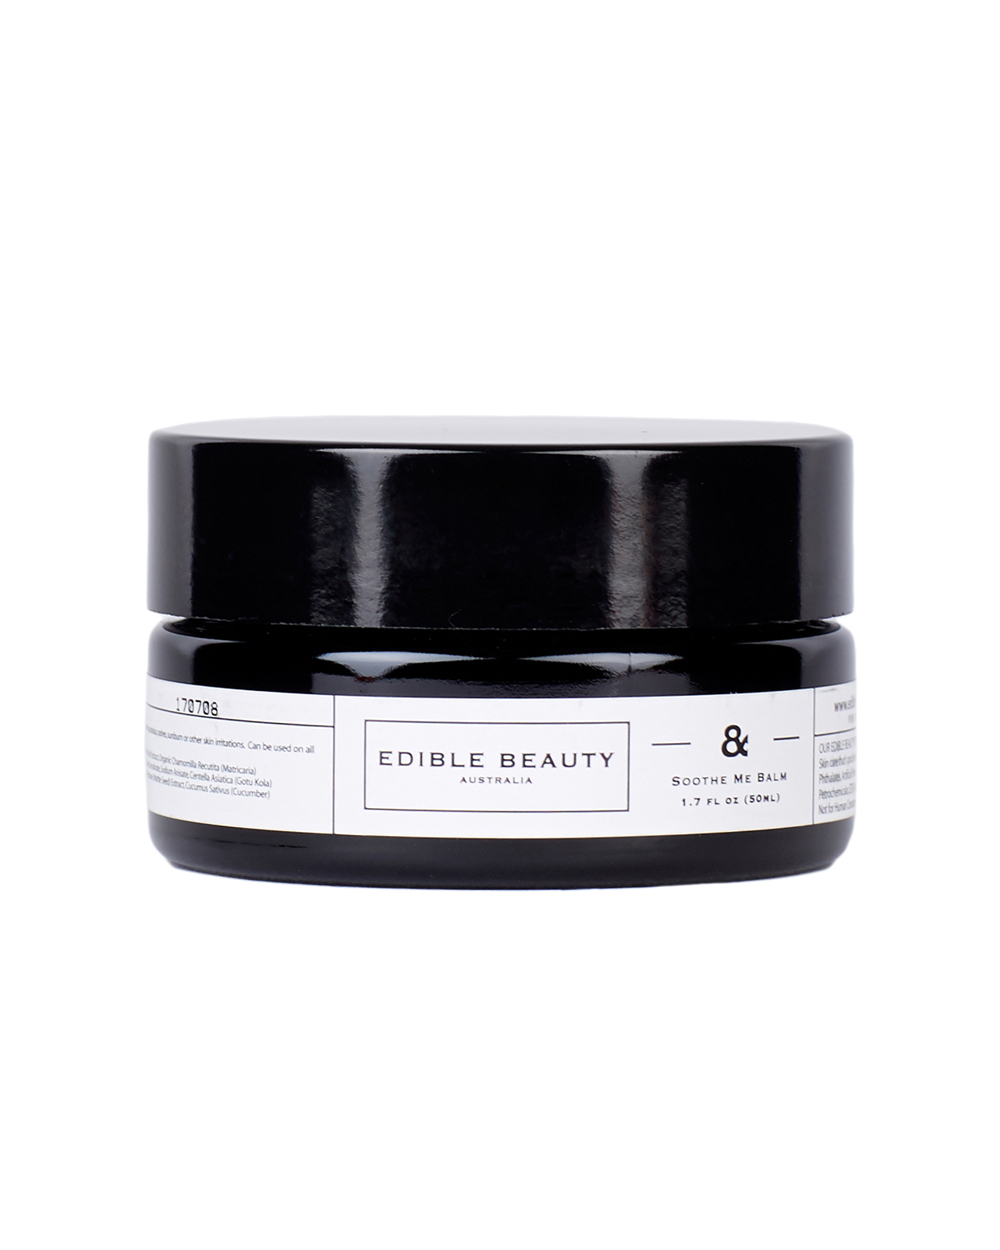 Edible Beauty & Soothe Me Balm, $50 from Spehora